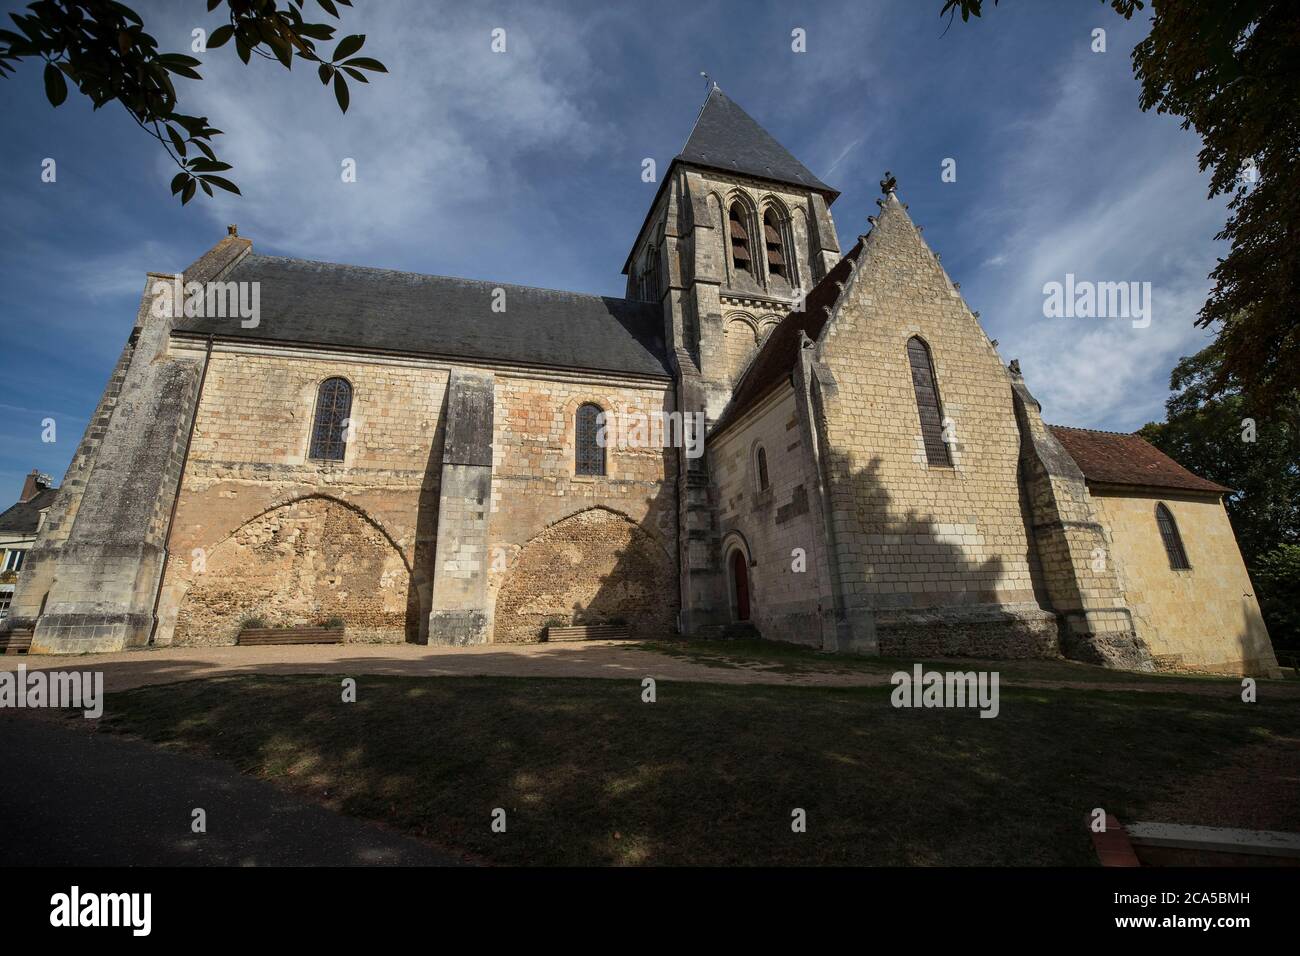 France, Loir et Cher, Loire valley listed as World Heritage by UNESCO, Troo, cave village, collegiate church of Saint Martin Stock Photo